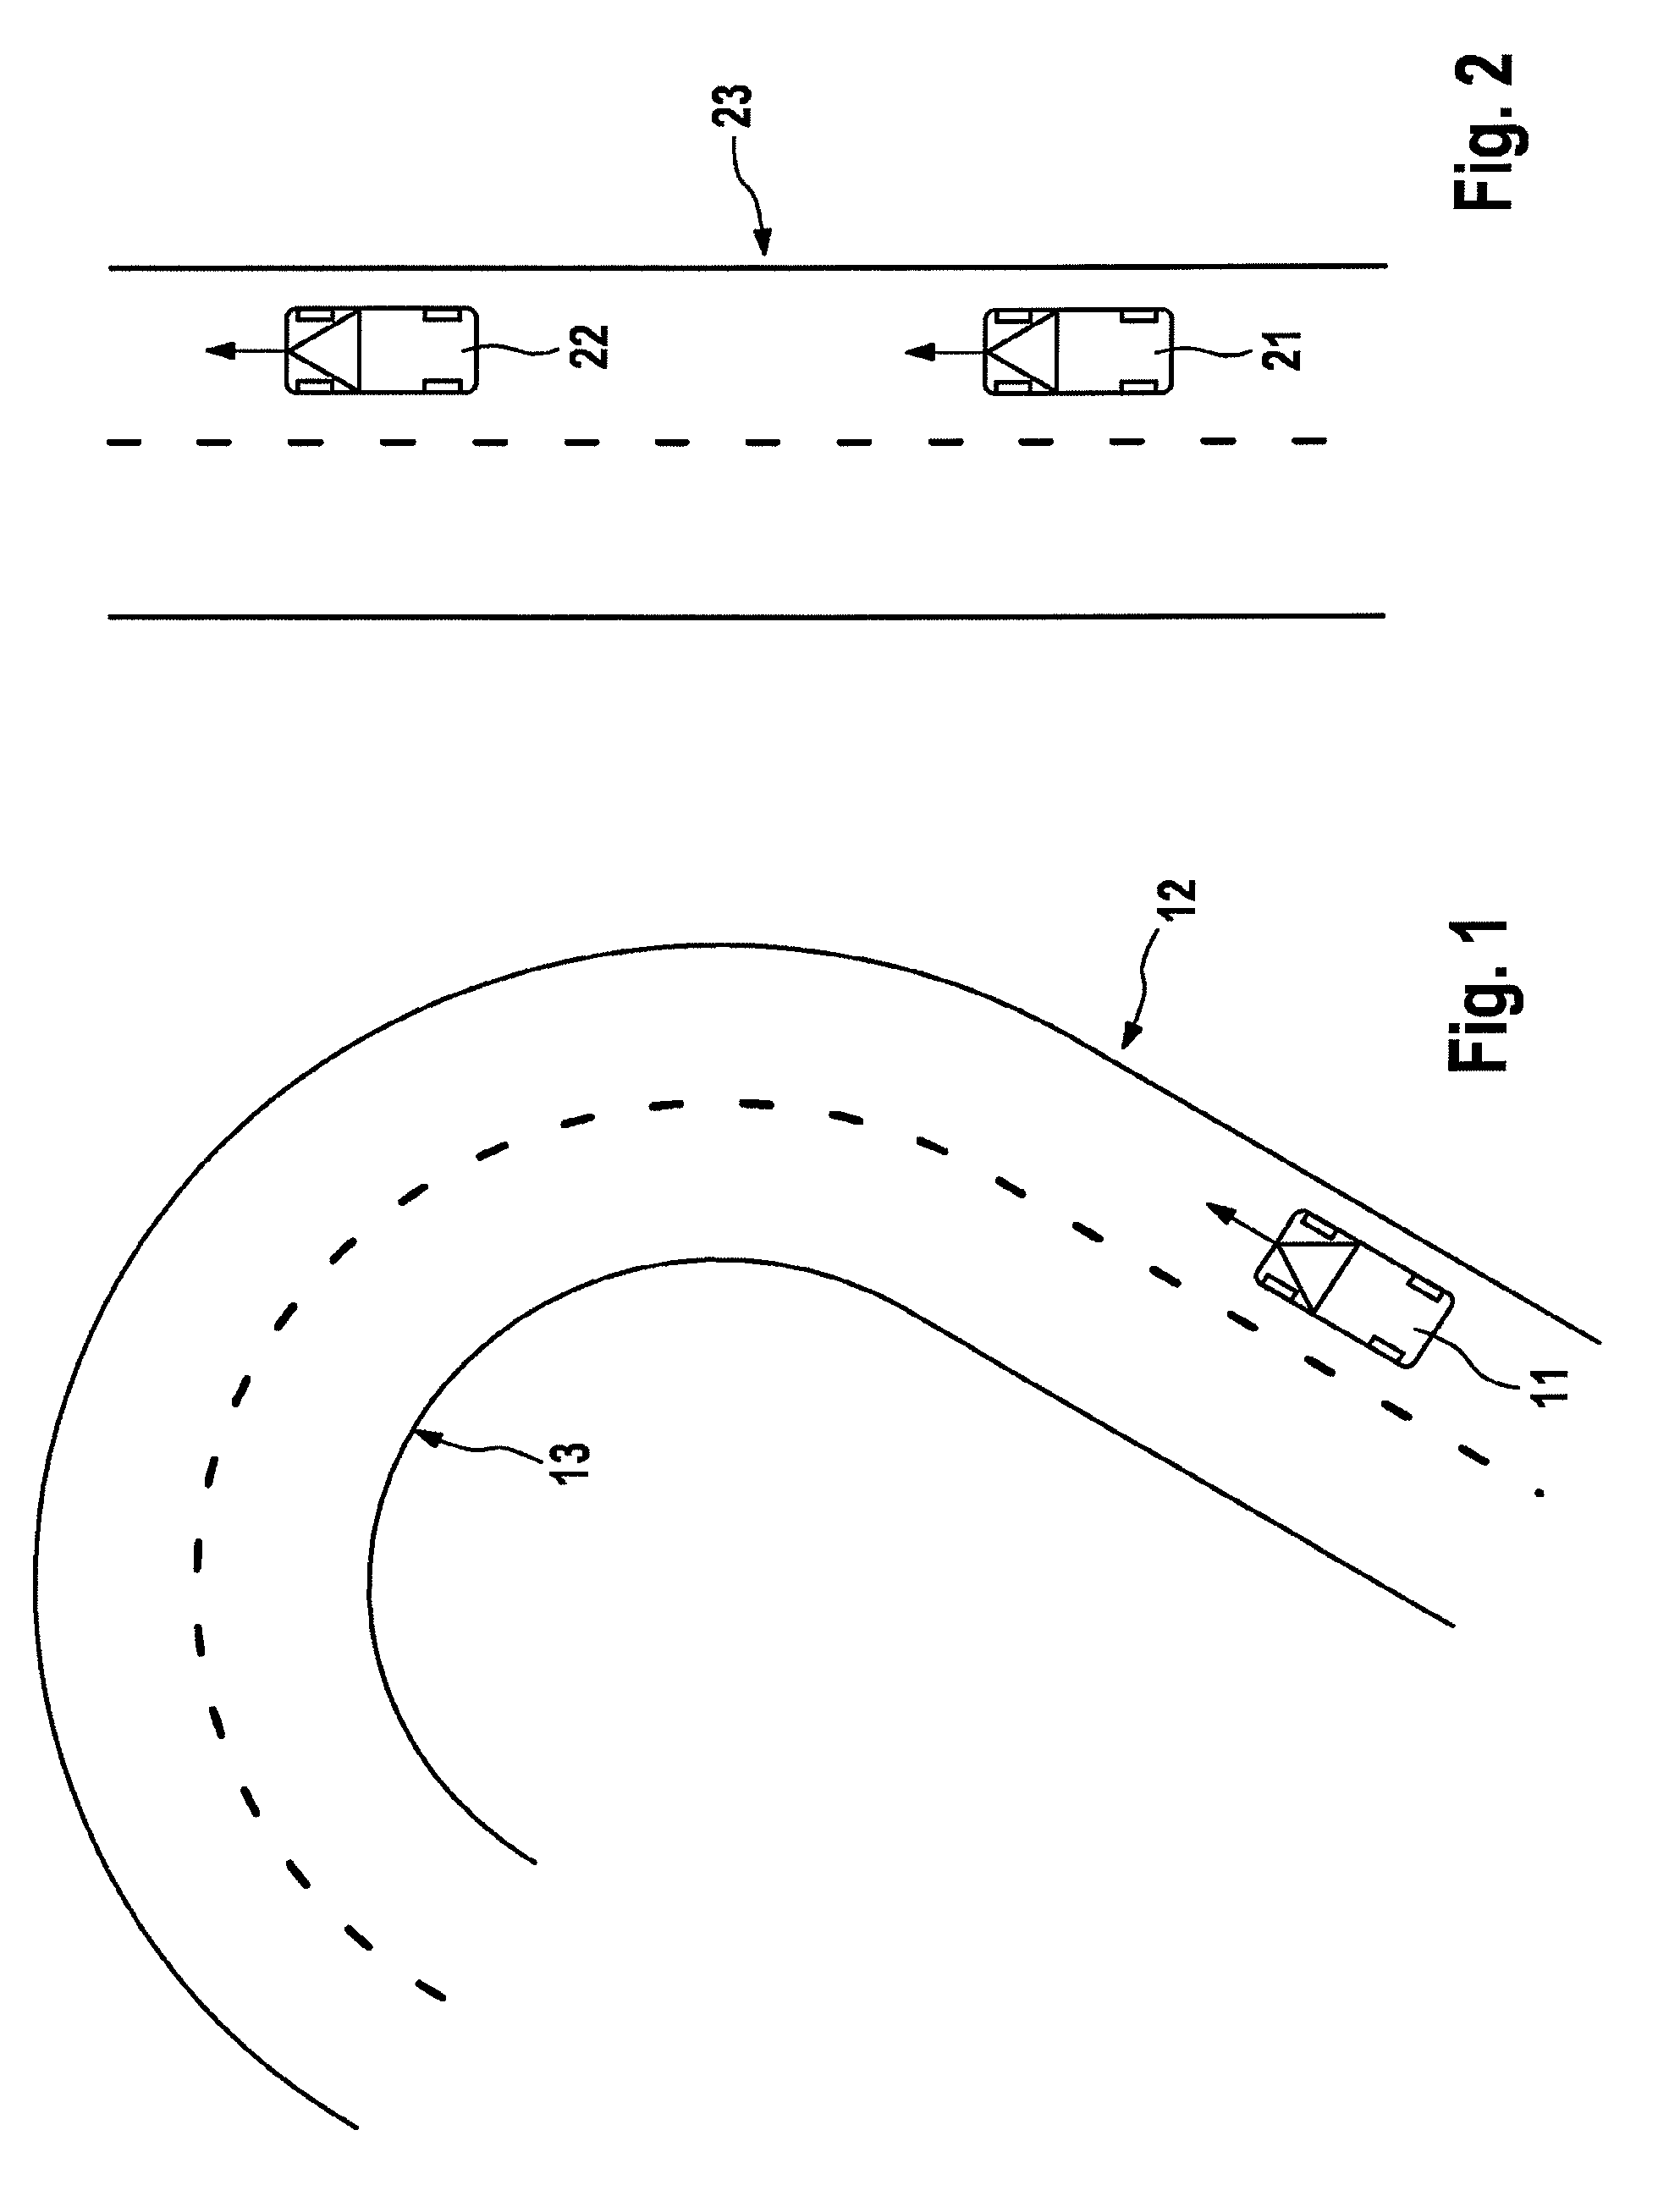 Method and system for promoting a uniform driving style